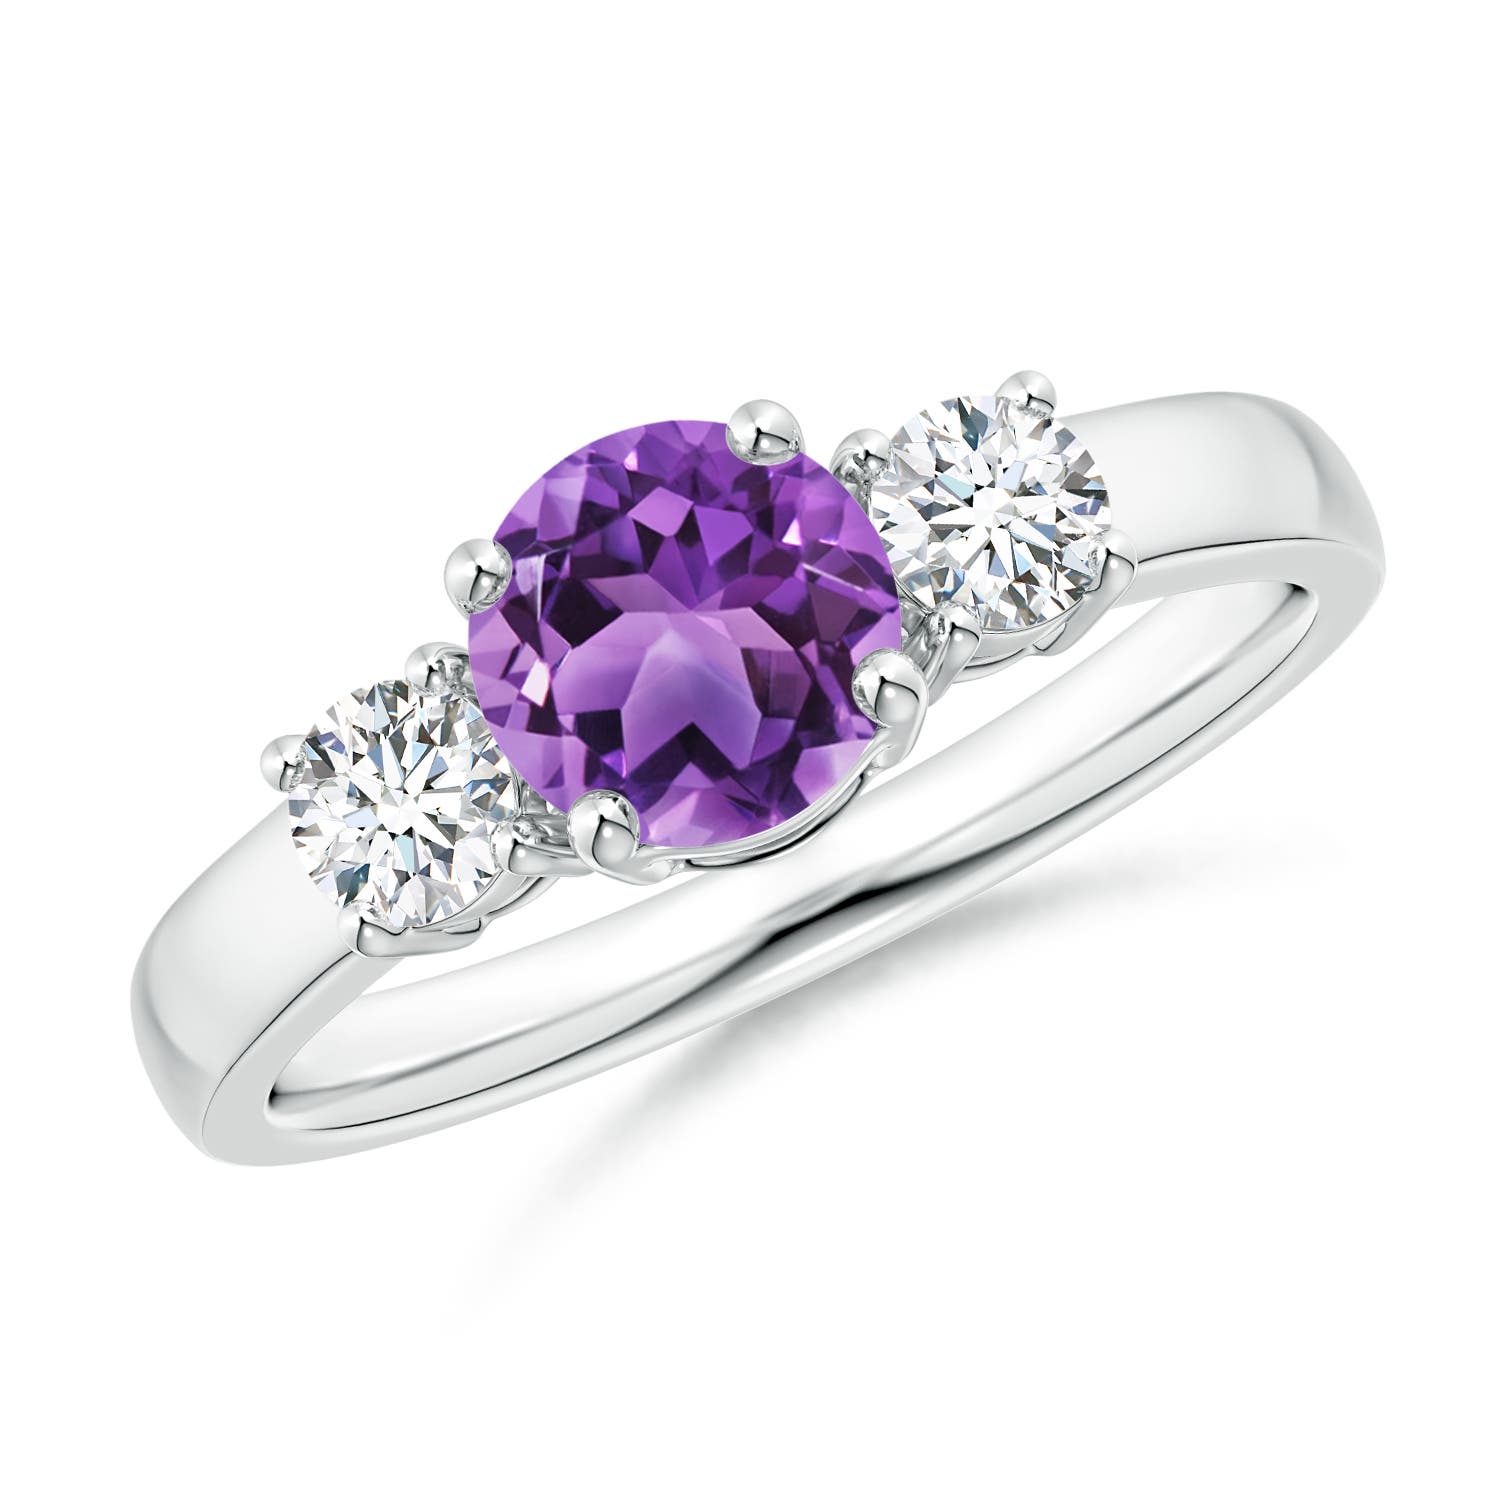 AA - Amethyst / 1.12 CT / 14 KT White Gold